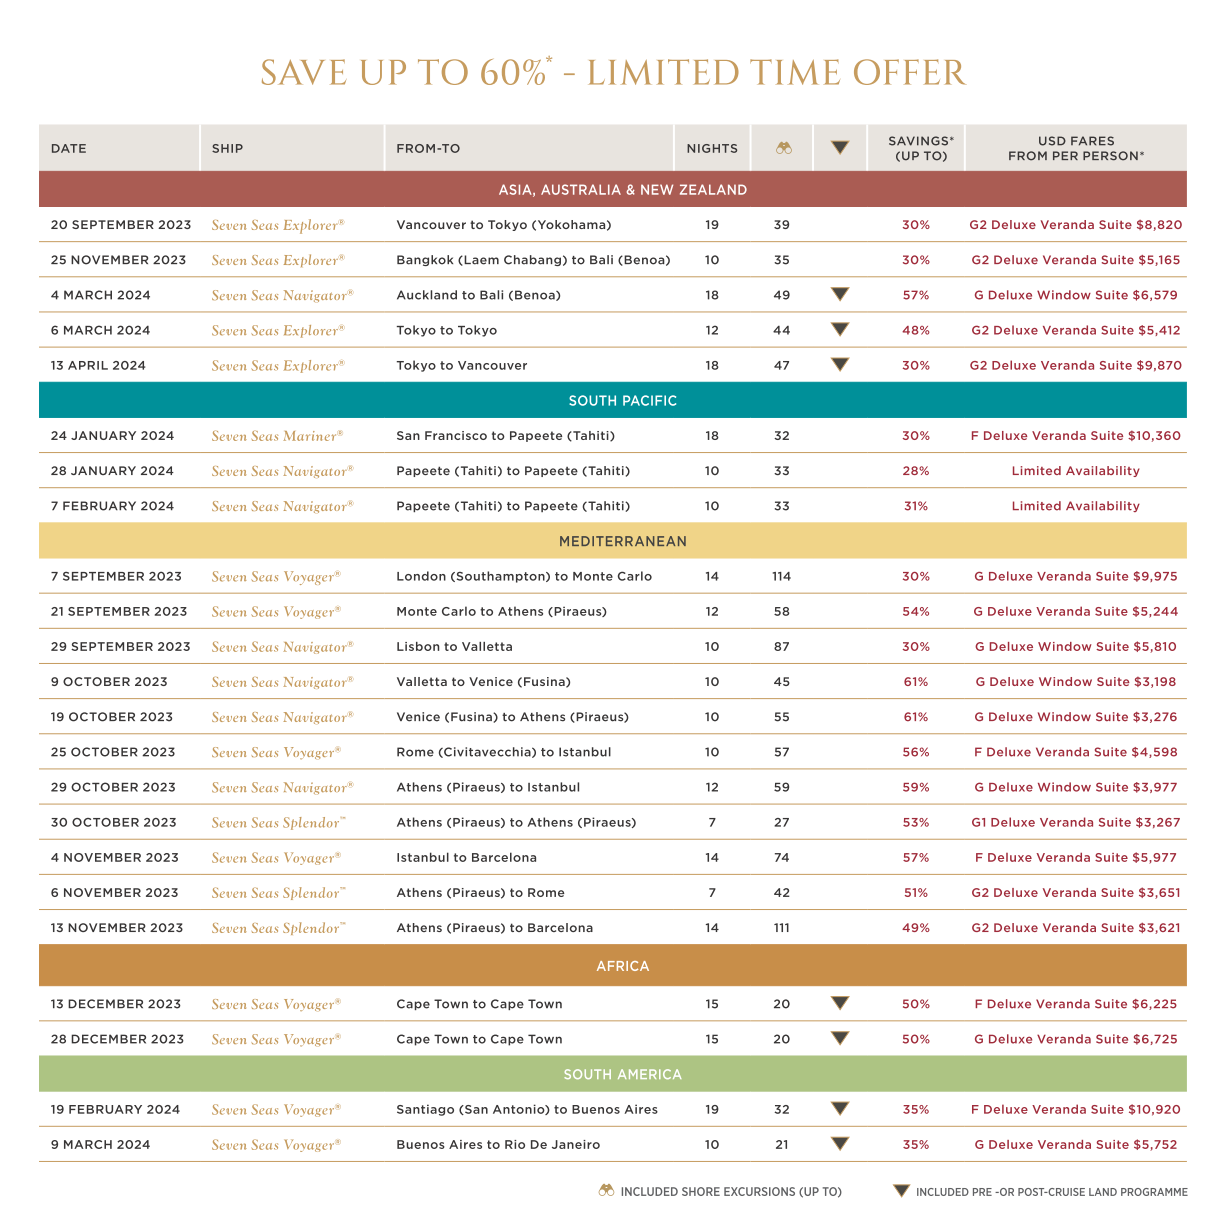 SAVE UP TO 60% * - LIMITED TIME OFFER *Savings of up to 60% offer is capacity controlled and applies to new bookings only made between 9 June 2023 and 31 August 2023. Guests will receive up to 60% off the cruise fare. Availability is limited and restrictions apply – applicable voyages are subject to removal at any time without notice. Offer applies to select suite categories D-H only and may not be combinable with other offers and promotions. Please enquire about combinability at the time of booking. Please note, this offer may be withdrawn at any time. For applicable voyages and suite categories, please visit RSSC.com. Regent Seven Seas Cruises® reserves the right to correct errors or omissions at any time. Please visit RSSC.com/Legal to view full terms, conditions and the complete Guest Ticket Contract. ©2023 Regent Seven Seas Cruises®. Hong Kong Licence number: 354364. FOR MORE INFORMATION, PLEASE VISIT RSSC.COM CALL +65 31 651 679 (SINGAPORE) | +852 800-930222 (HONG KONG AND REST OF ASIA) OR CONTACT YOUR TRAVEL ADVISOR DATE SHIP FROM-TO NIGHTS SAVINGS* (UP TO) USD FARES FROM PER PERSON* ASIA, AUSTRALIA & NEW ZEALAND 20 SEPTEMBER 2023 Seven Seas Explorer ® Vancouver to Tokyo (Yokohama) 19 39 30% G2 Deluxe Veranda Suite $8,820 25 NOVEMBER 2023 Seven Seas Explorer ® Bangkok (Laem Chabang) to Bali (Benoa) 10 35 30% G2 Deluxe Veranda Suite $5,165 4 MARCH 2024 Seven Seas Navigator ® Auckland to Bali (Benoa) 18 49 57% G Deluxe Window Suite $6,579 6 MARCH 2024 Seven Seas Explorer ® Tokyo to Tokyo 12 44 48% G2 Deluxe Veranda Suite $5,412 13 APRIL 2024 Seven Seas Explorer ® Tokyo to Vancouver 18 47 30% G2 Deluxe Veranda Suite $9,870 SOUTH PACIFIC 24 JANUARY 2024 Seven Seas Mariner ® San Francisco to Papeete (Tahiti) 18 32 30% F Deluxe Veranda Suite $10,360 28 JANUARY 2024 Seven Seas Navigator ® Papeete (Tahiti) to Papeete (Tahiti) 10 33 28% Limited Availability 7 FEBRUARY 2024 Seven Seas Navigator ® Papeete (Tahiti) to Papeete (Tahiti) 10 33 31% Limited Availability MEDITERRANEAN 7 SEPTEMBER 2023 Seven Seas Voyager ® London (Southampton) to Monte Carlo 14 114 30% G Deluxe Veranda Suite $9,975 21 SEPTEMBER 2023 Seven Seas Voyager ® Monte Carlo to Athens (Piraeus) 12 58 54% G Deluxe Veranda Suite $5,244 29 SEPTEMBER 2023 Seven Seas Navigator ® Lisbon to Valletta 10 87 30% G Deluxe Window Suite $5,810 9 OCTOBER 2023 Seven Seas Navigator ® Valletta to Venice (Fusina) 10 45 61% G Deluxe Window Suite $3,198 19 OCTOBER 2023 Seven Seas Navigator ® Venice (Fusina) to Athens (Piraeus) 10 55 61% G Deluxe Window Suite $3,276 25 OCTOBER 2023 Seven Seas Voyager ® Rome (Civitavecchia) to Istanbul 10 57 56% F Deluxe Veranda Suite $4,598 29 OCTOBER 2023 Seven Seas Navigator ® Athens (Piraeus) to Istanbul 12 59 59% G Deluxe Window Suite $3,977 30 OCTOBER 2023 Seven Seas Splendor ™ Athens (Piraeus) to Athens (Piraeus) 7 27 53% G1 Deluxe Veranda Suite $3,267 4 NOVEMBER 2023 Seven Seas Voyager ® Istanbul to Barcelona 14 74 57% F Deluxe Veranda Suite $5,977 6 NOVEMBER 2023 Seven Seas Splendor ™ Athens (Piraeus) to Rome 7 42 51% G2 Deluxe Veranda Suite $3,651 13 NOVEMBER 2023 Seven Seas Splendor ™ Athens (Piraeus) to Barcelona 14 111 49% G2 Deluxe Veranda Suite $3,621 AFRICA 13 DECEMBER 2023 Seven Seas Voyager ® Cape Town to Cape Town 15 20 50% F Deluxe Veranda Suite $6,225 28 DECEMBER 2023 Seven Seas Voyager ® Cape Town to Cape Town 15 20 50% G Deluxe Veranda Suite $6,725 SOUTH AMERICA 19 FEBRUARY 2024 Seven Seas Voyager ® Santiago (San Antonio) to Buenos Aires 19 32 35% F Deluxe Veranda Suite $10,920 9 MARCH 2024 Seven Seas Voyager ® Buenos Aires to Rio De Janeiro 10 21 35% G Deluxe Veranda Suite $5,752 INCLUDED SHORE EXCURSIONS (UP TO) INCLUDED PRE -OR POST-CRUISE LAND PROGRAMME